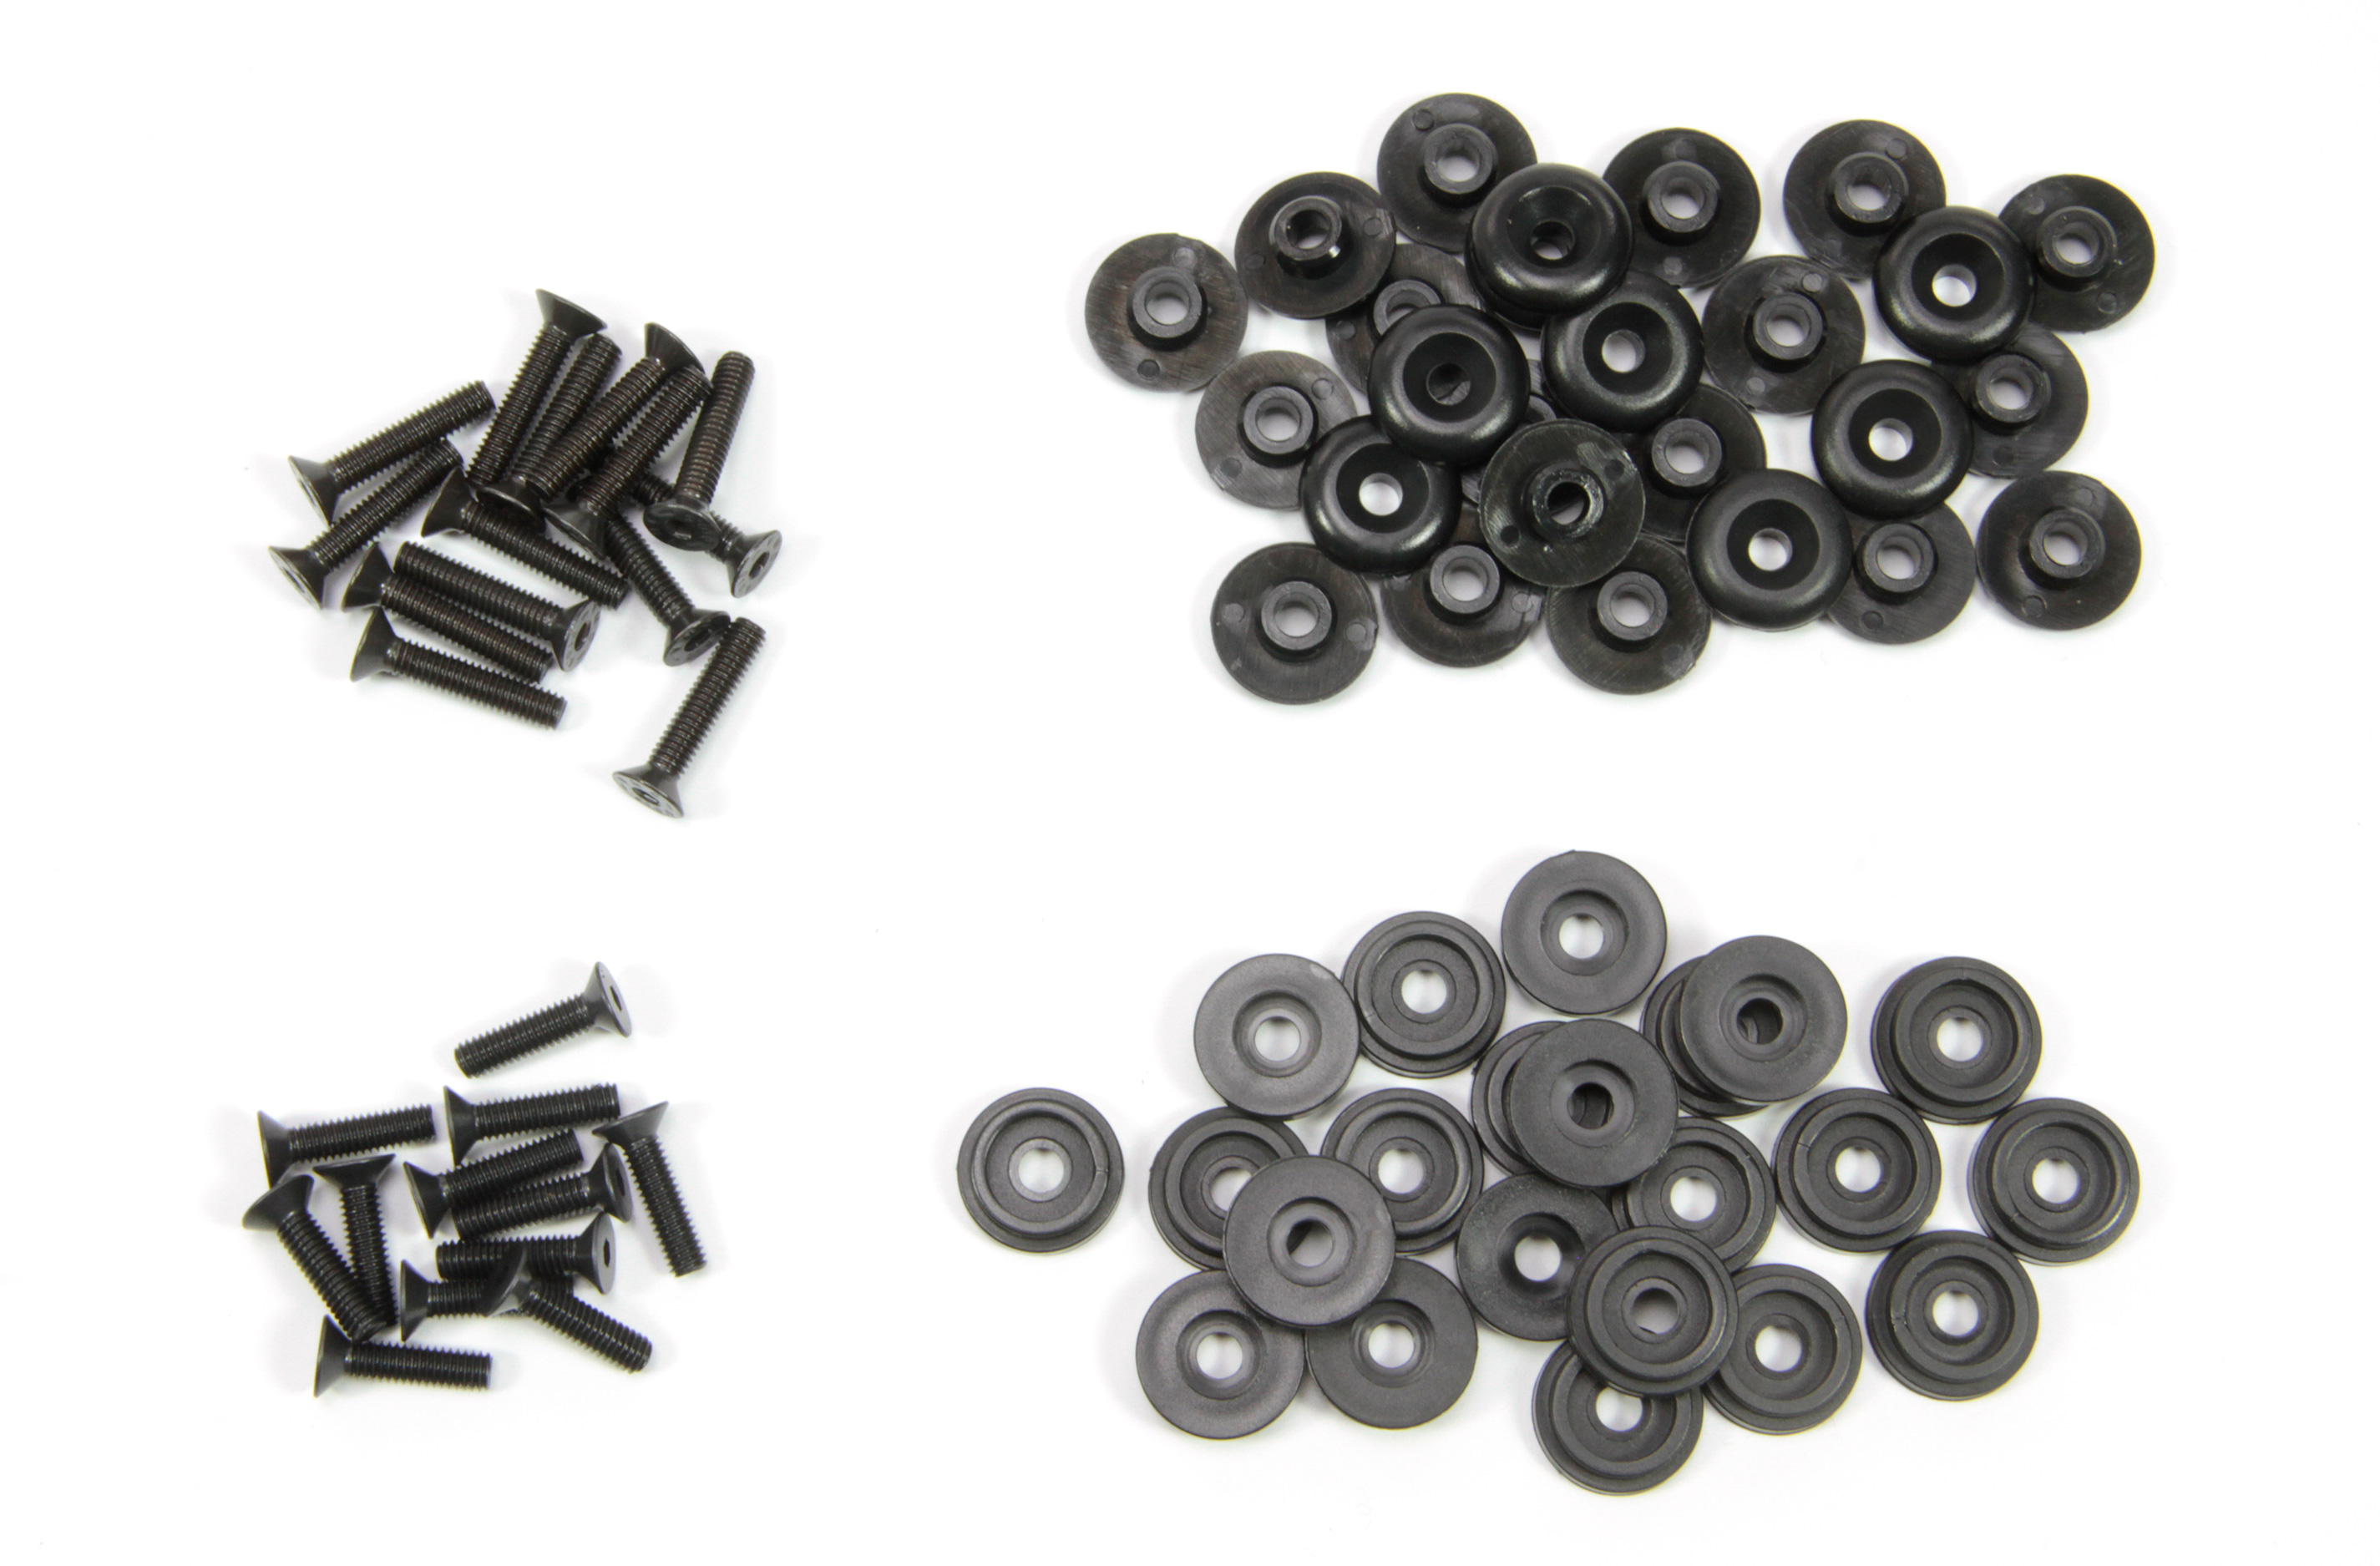 y1467 Full body shell installation kit with 10.9 screws for Losi 5ive-T/2.0 and Mini